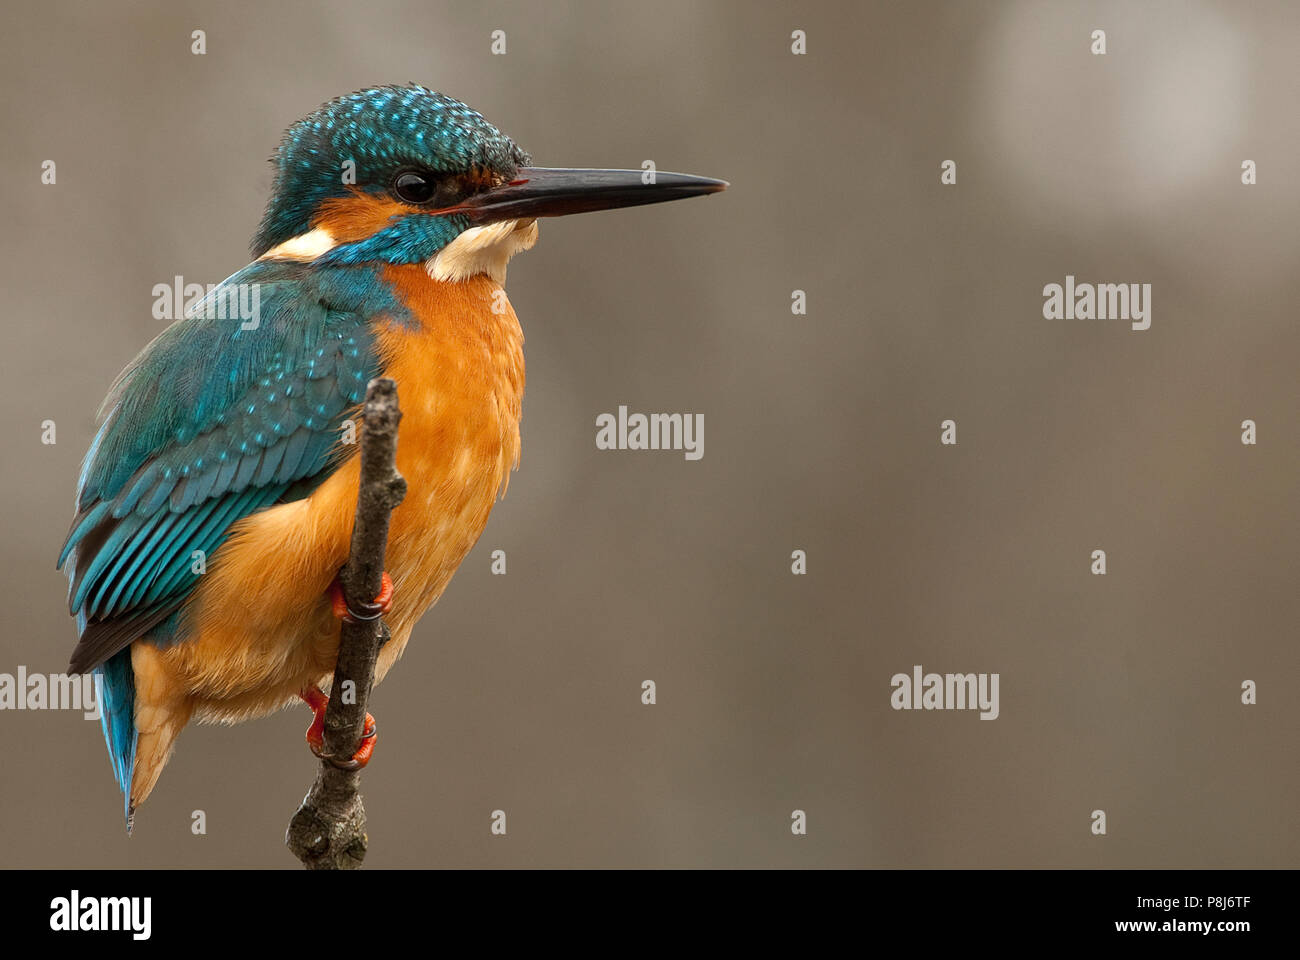 Kingfisher (Alcedo atthis) perched Stock Photo